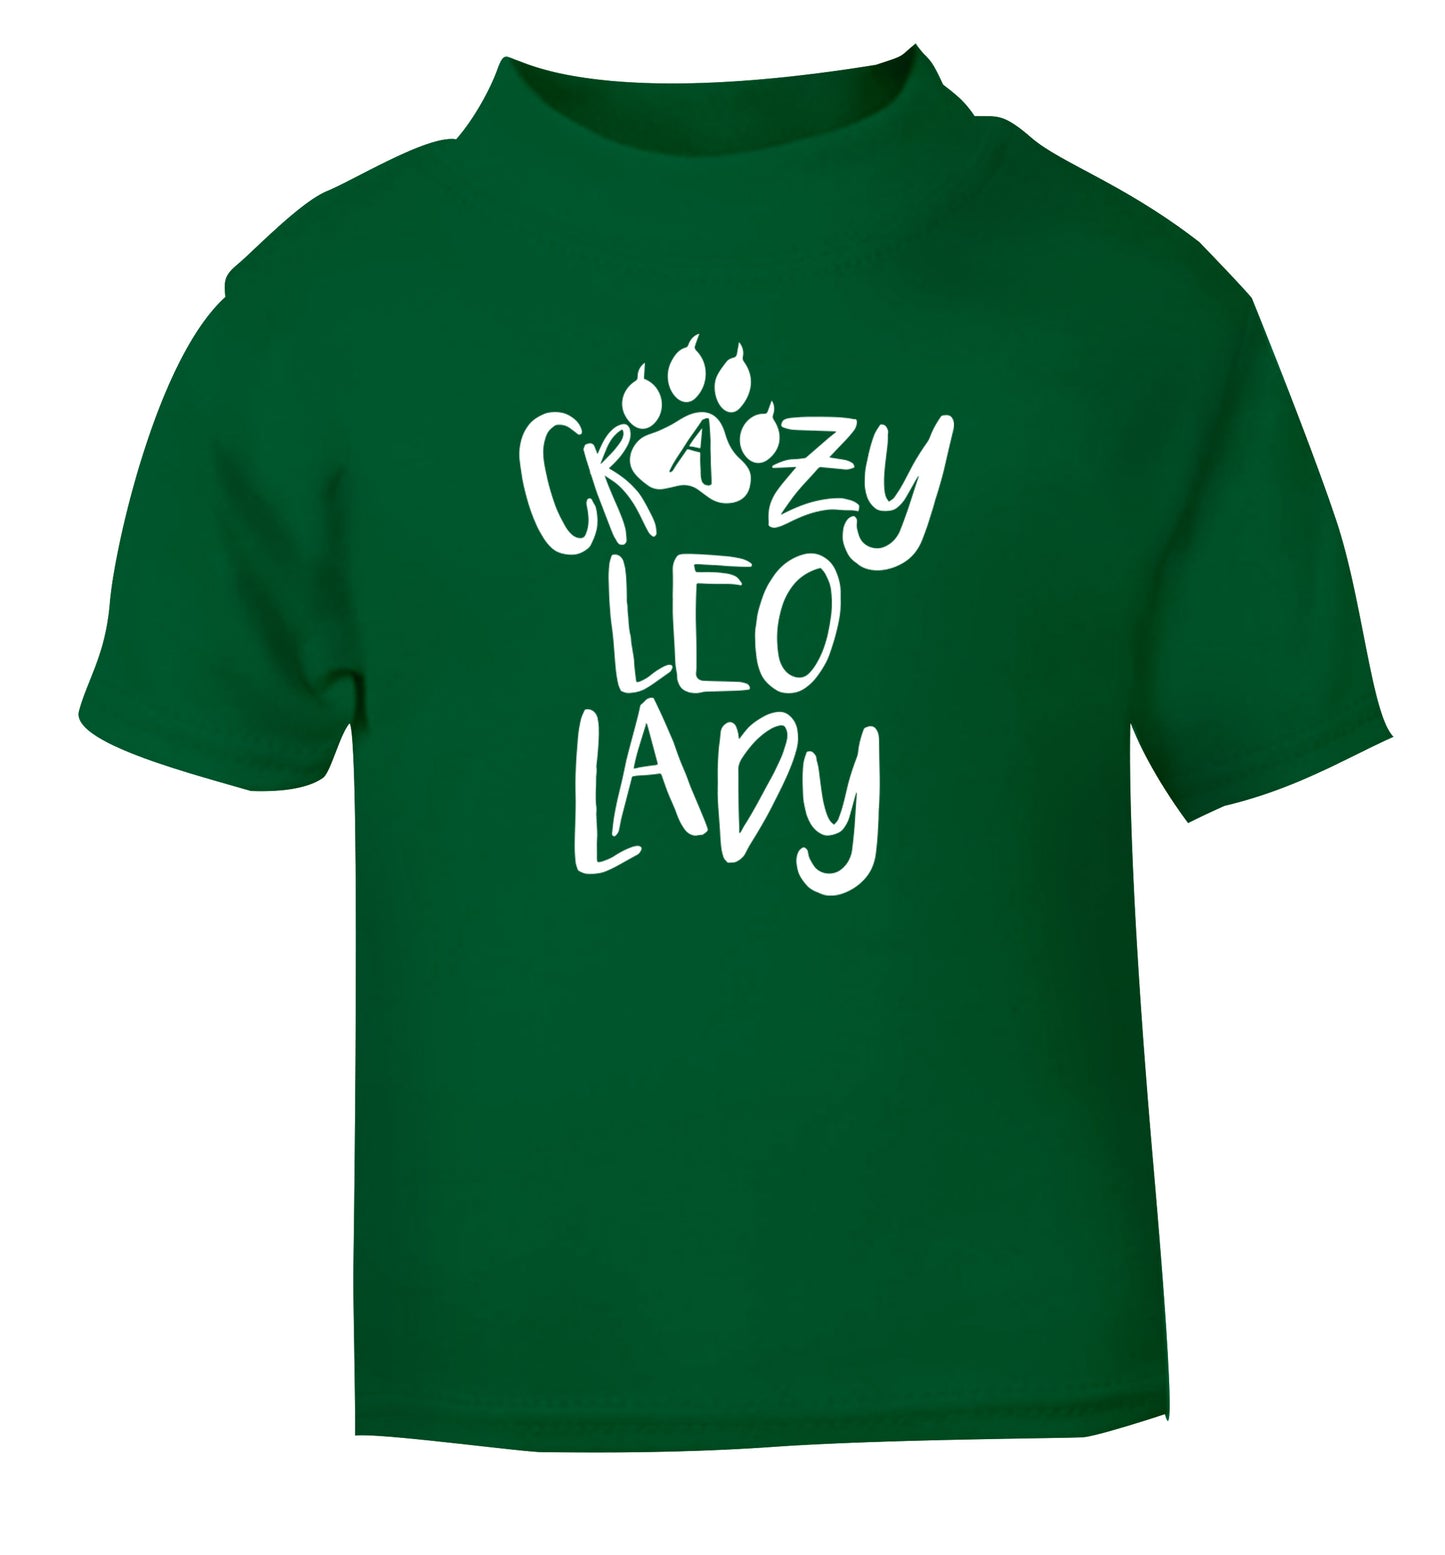 Crazy leo lady green Baby Toddler Tshirt 2 Years